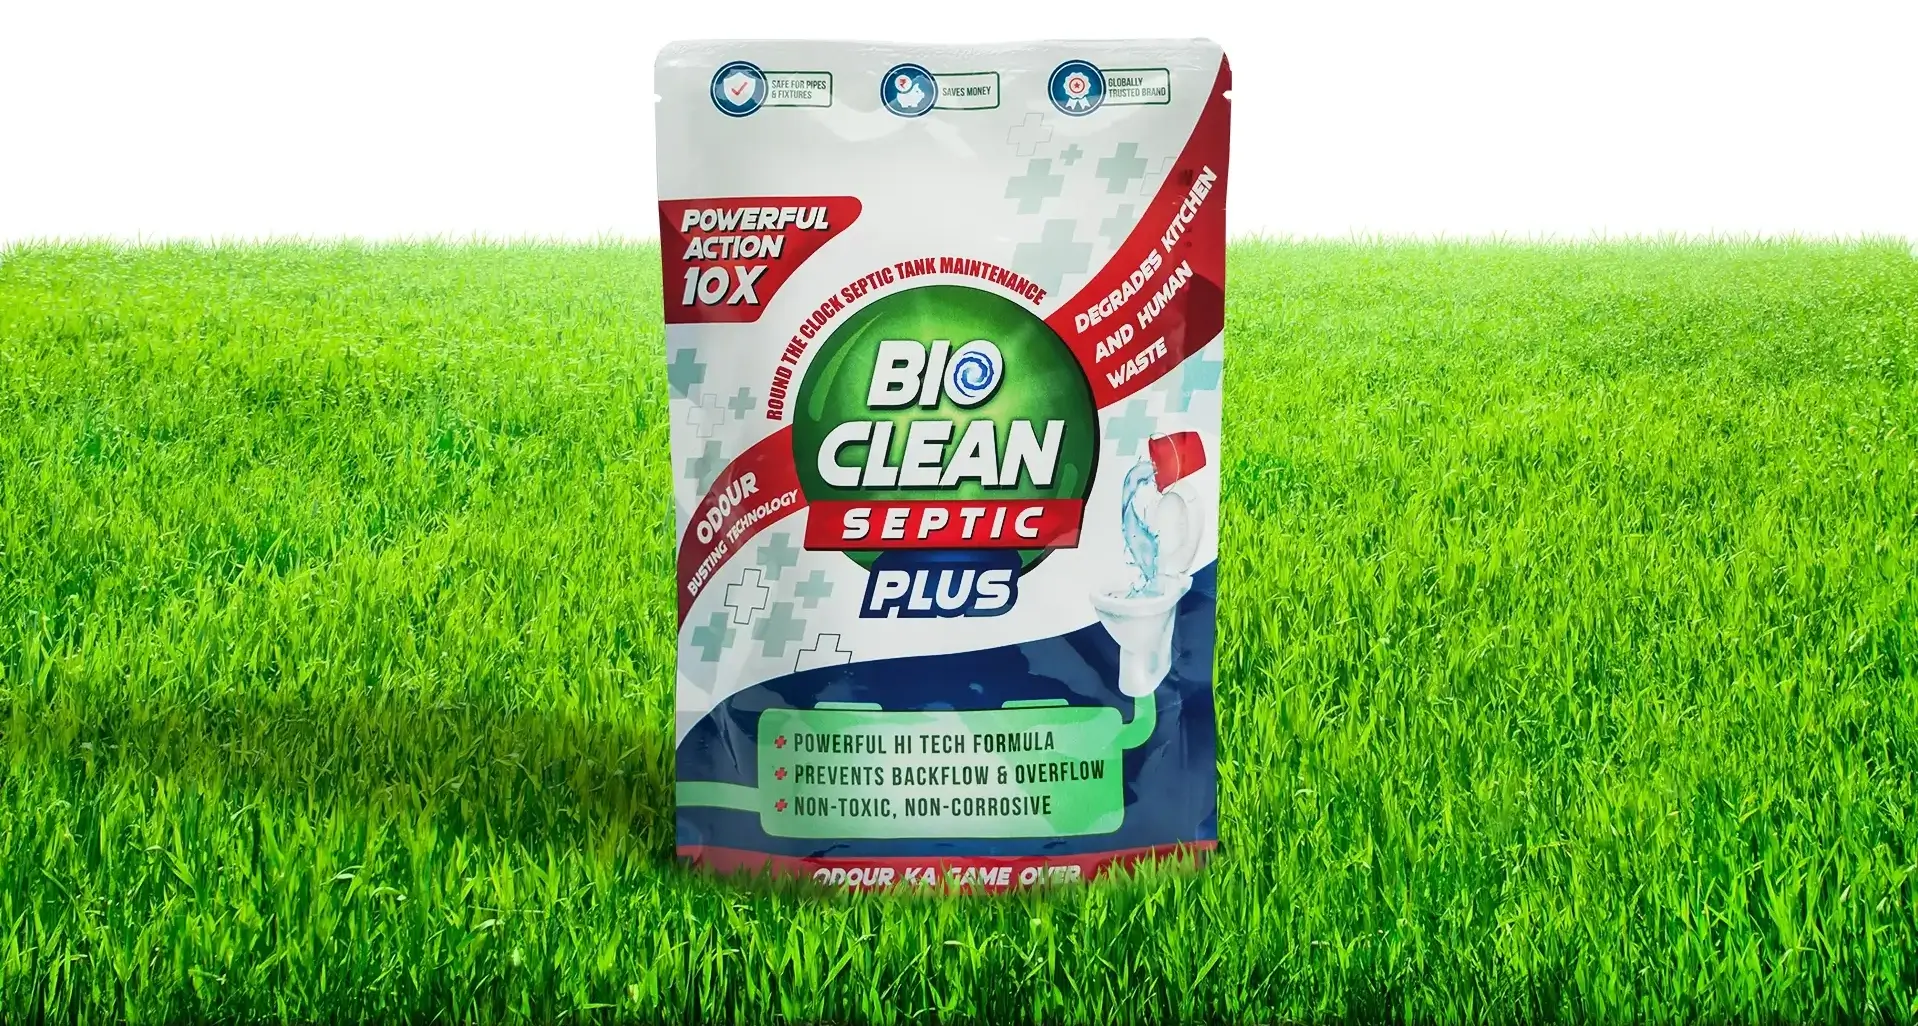 Bioclean Septic Plus Home Page Image